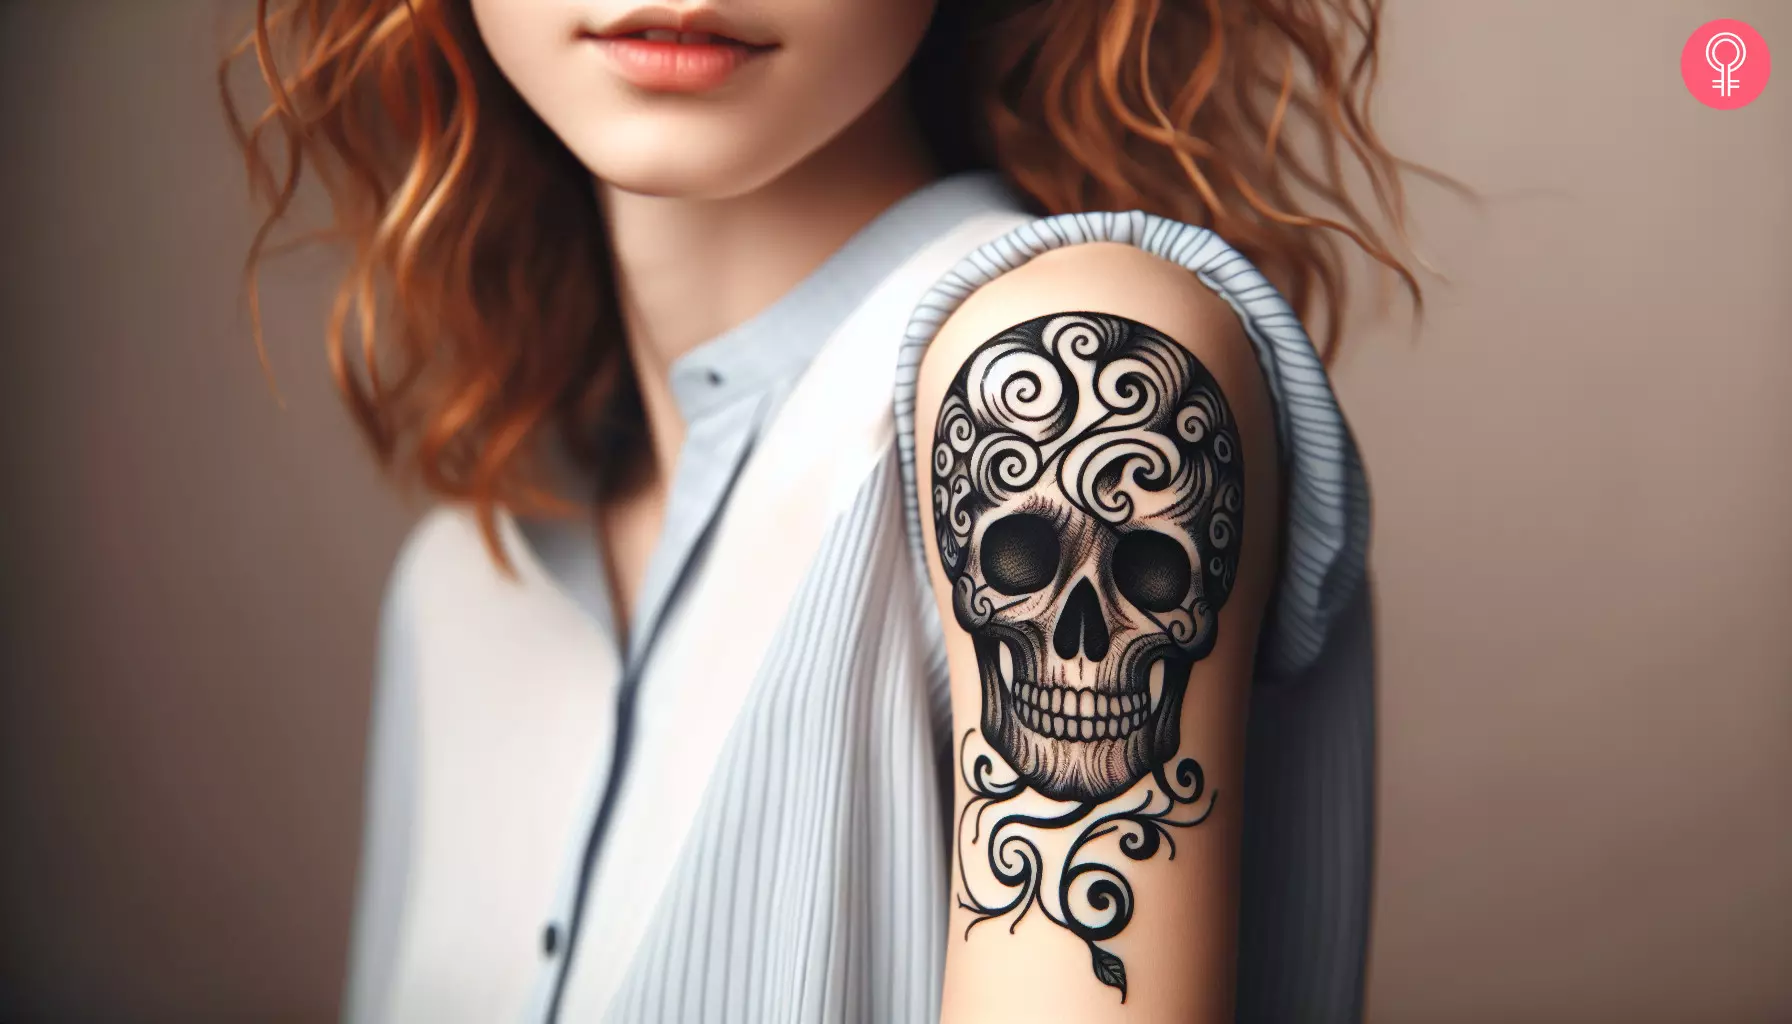 Woman with whimsical skull tattoo on her arm